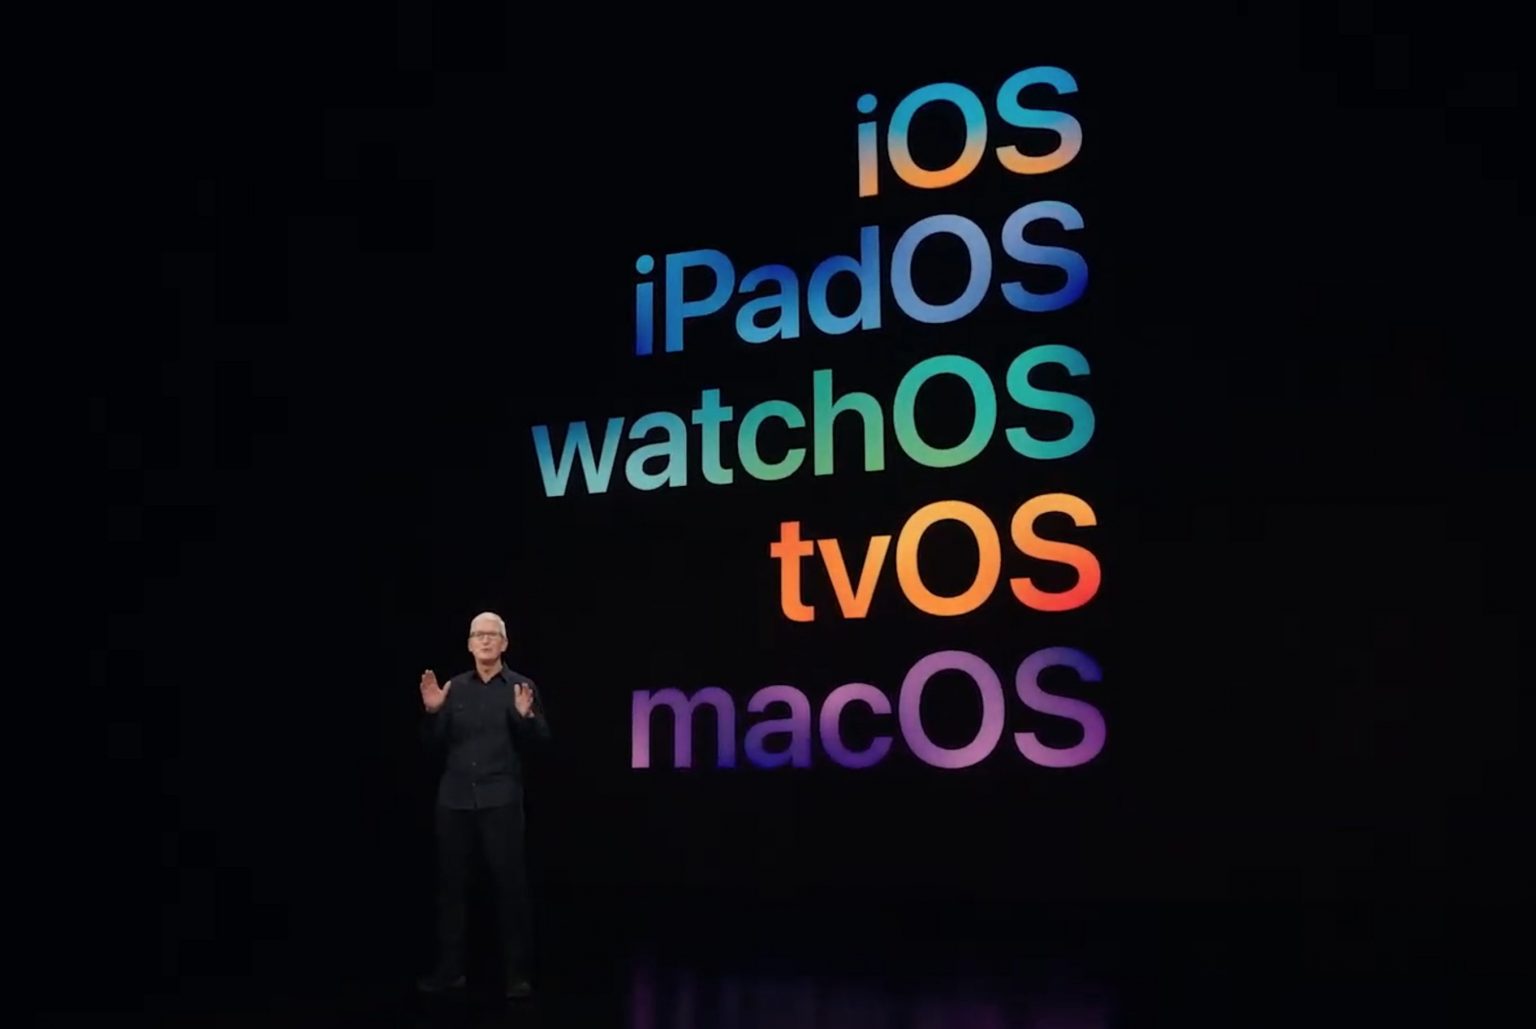 Apple CEO Tim Cook wraps the WWDC21 keynote on June 7, 2021.